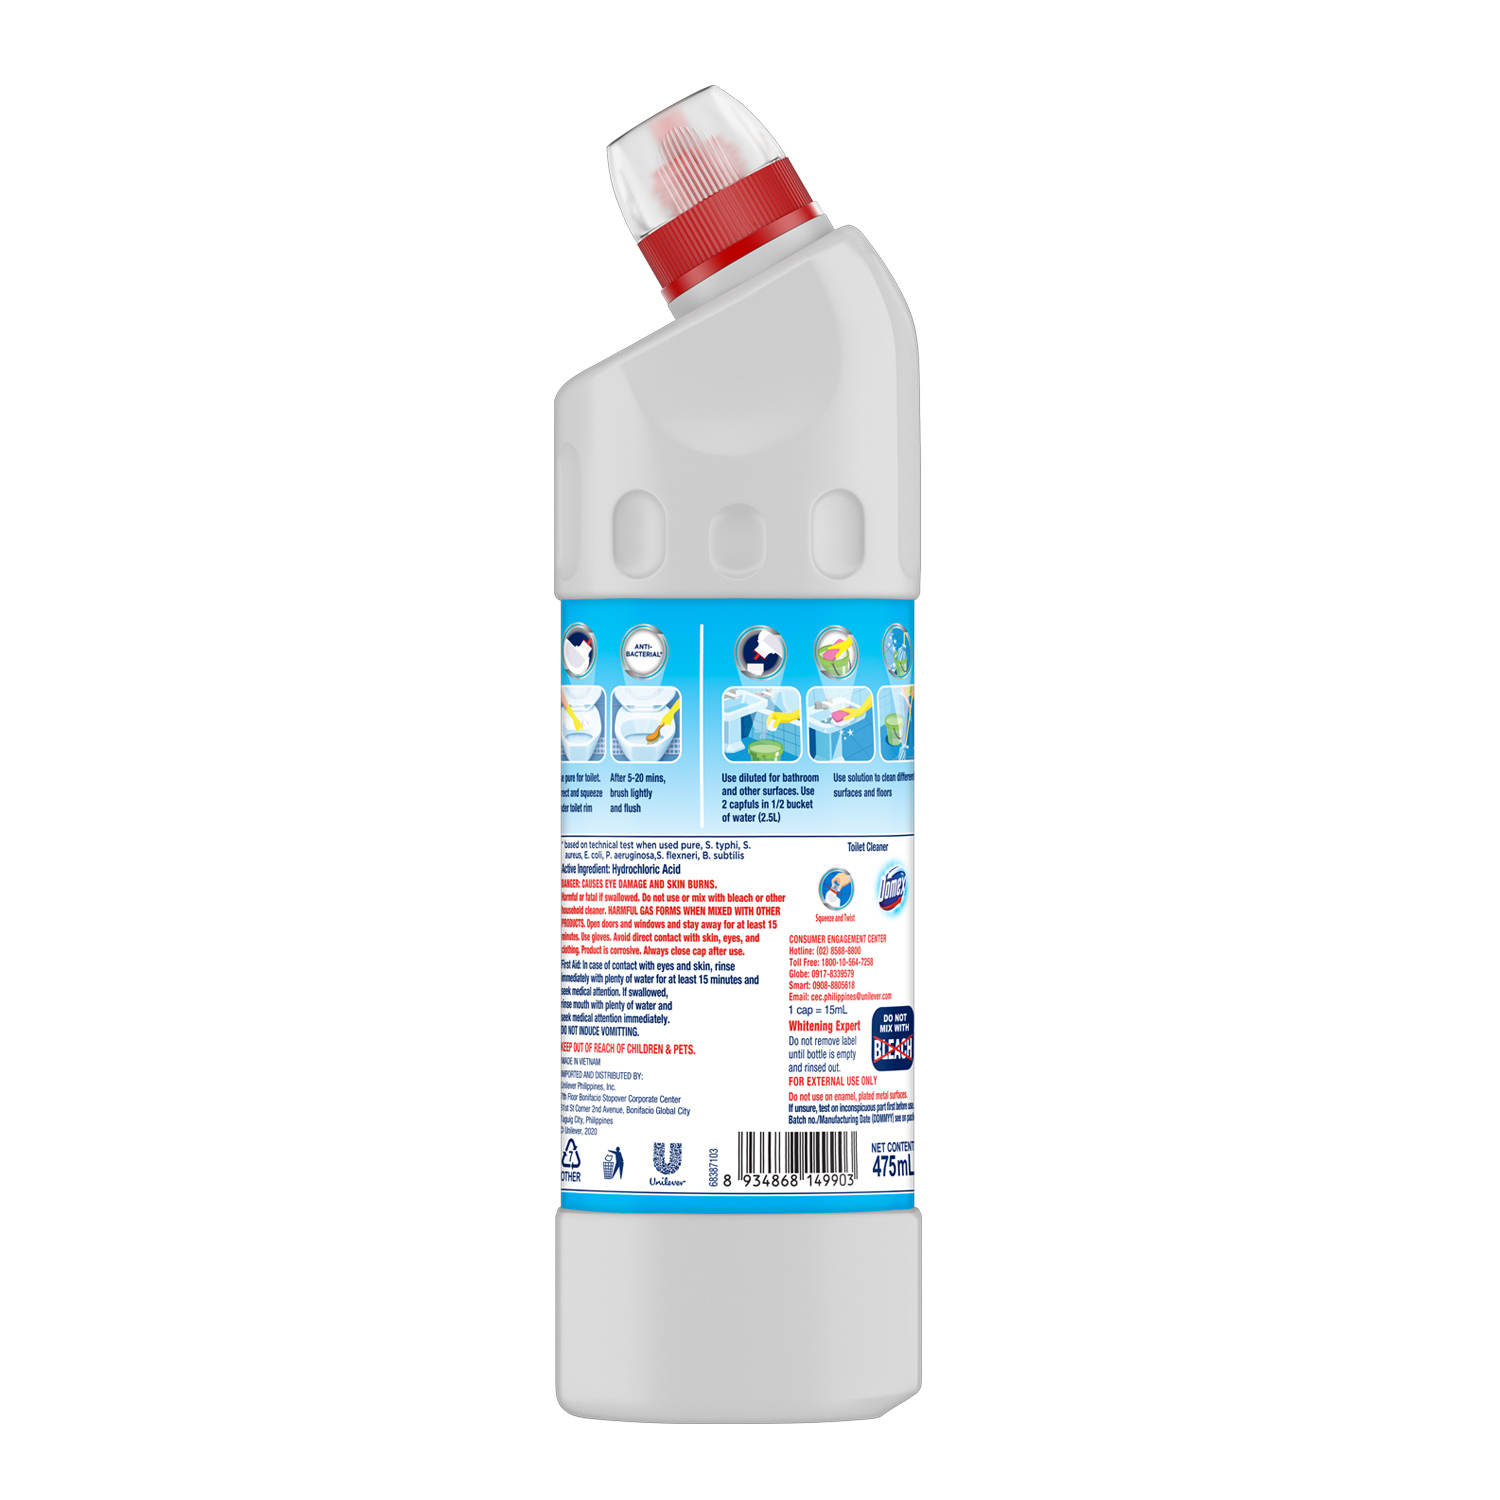 Domex Ultra Thick Bleach Toilet Cleaner 28ml + Domex Stain and